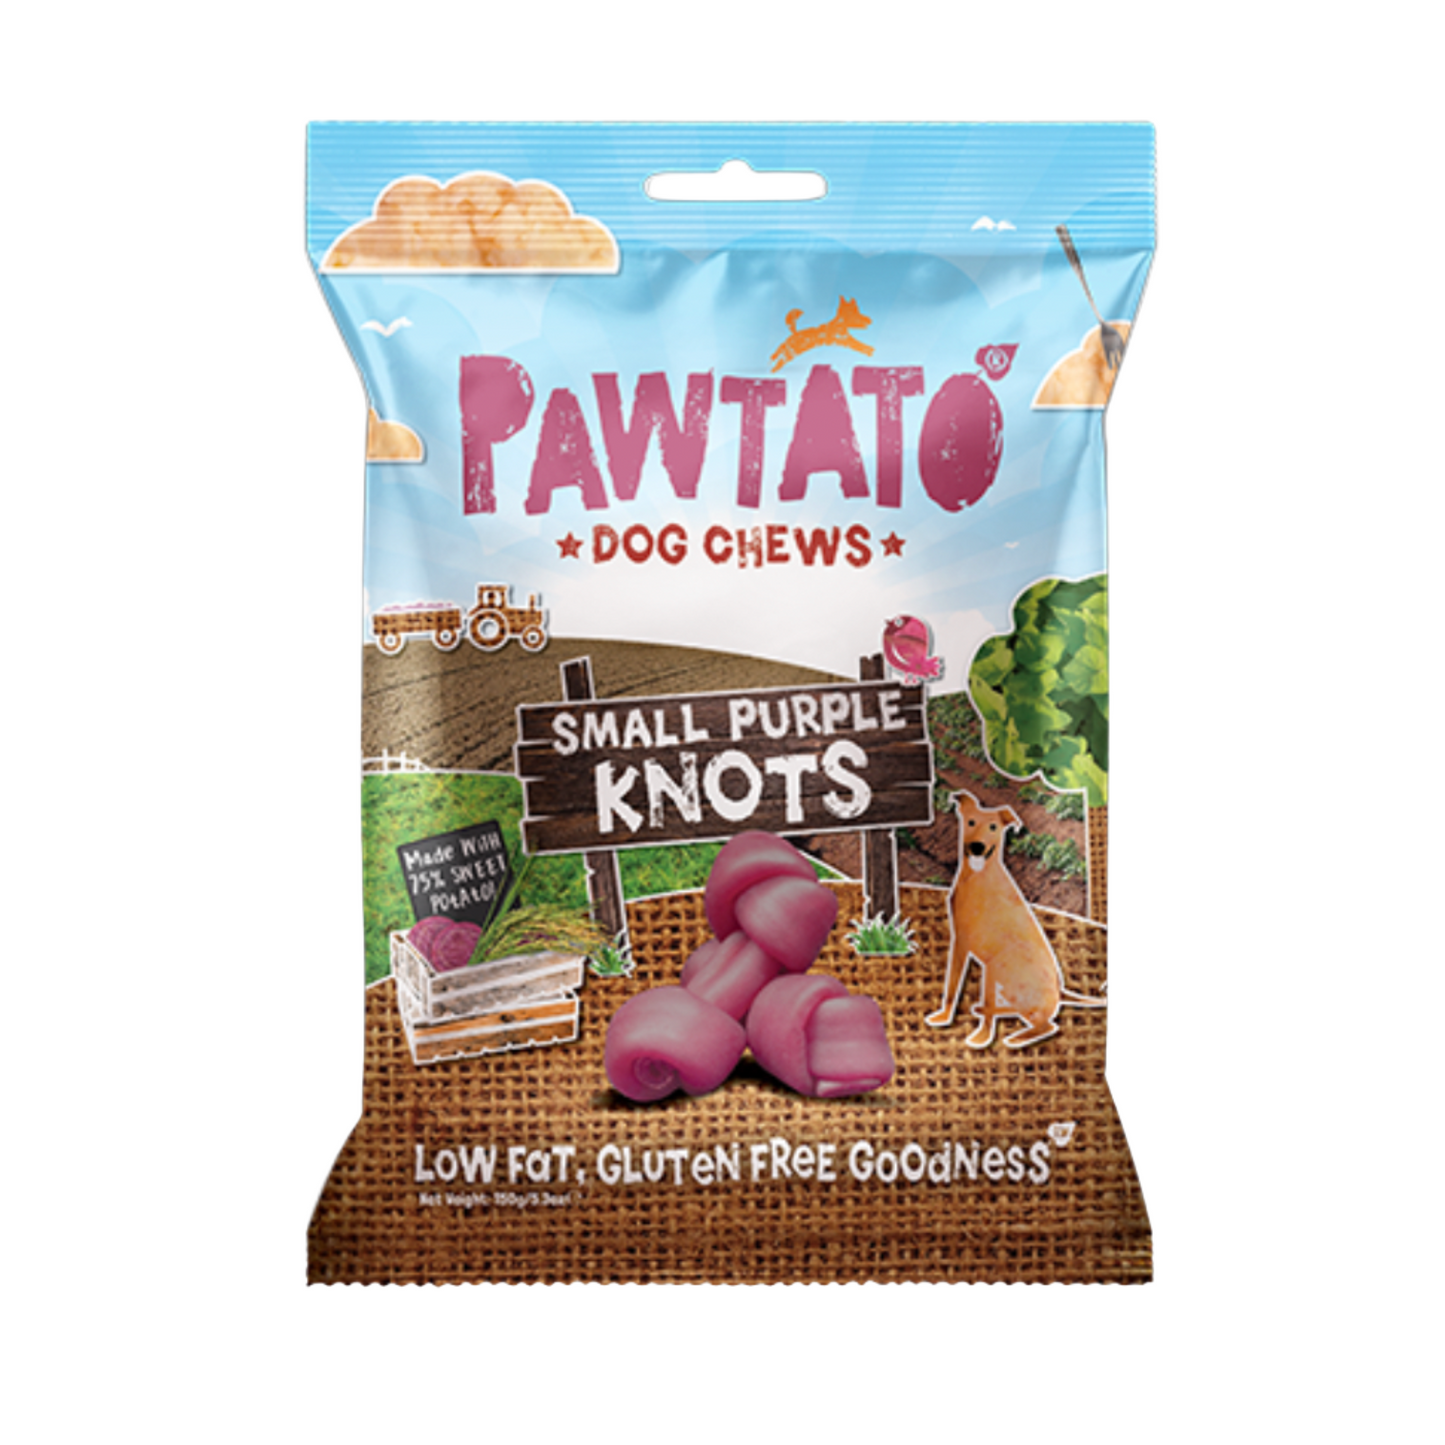 Pawtato Small Purple Knots Chews Made From Natural Sweet Potato Pack Of 10, 150g